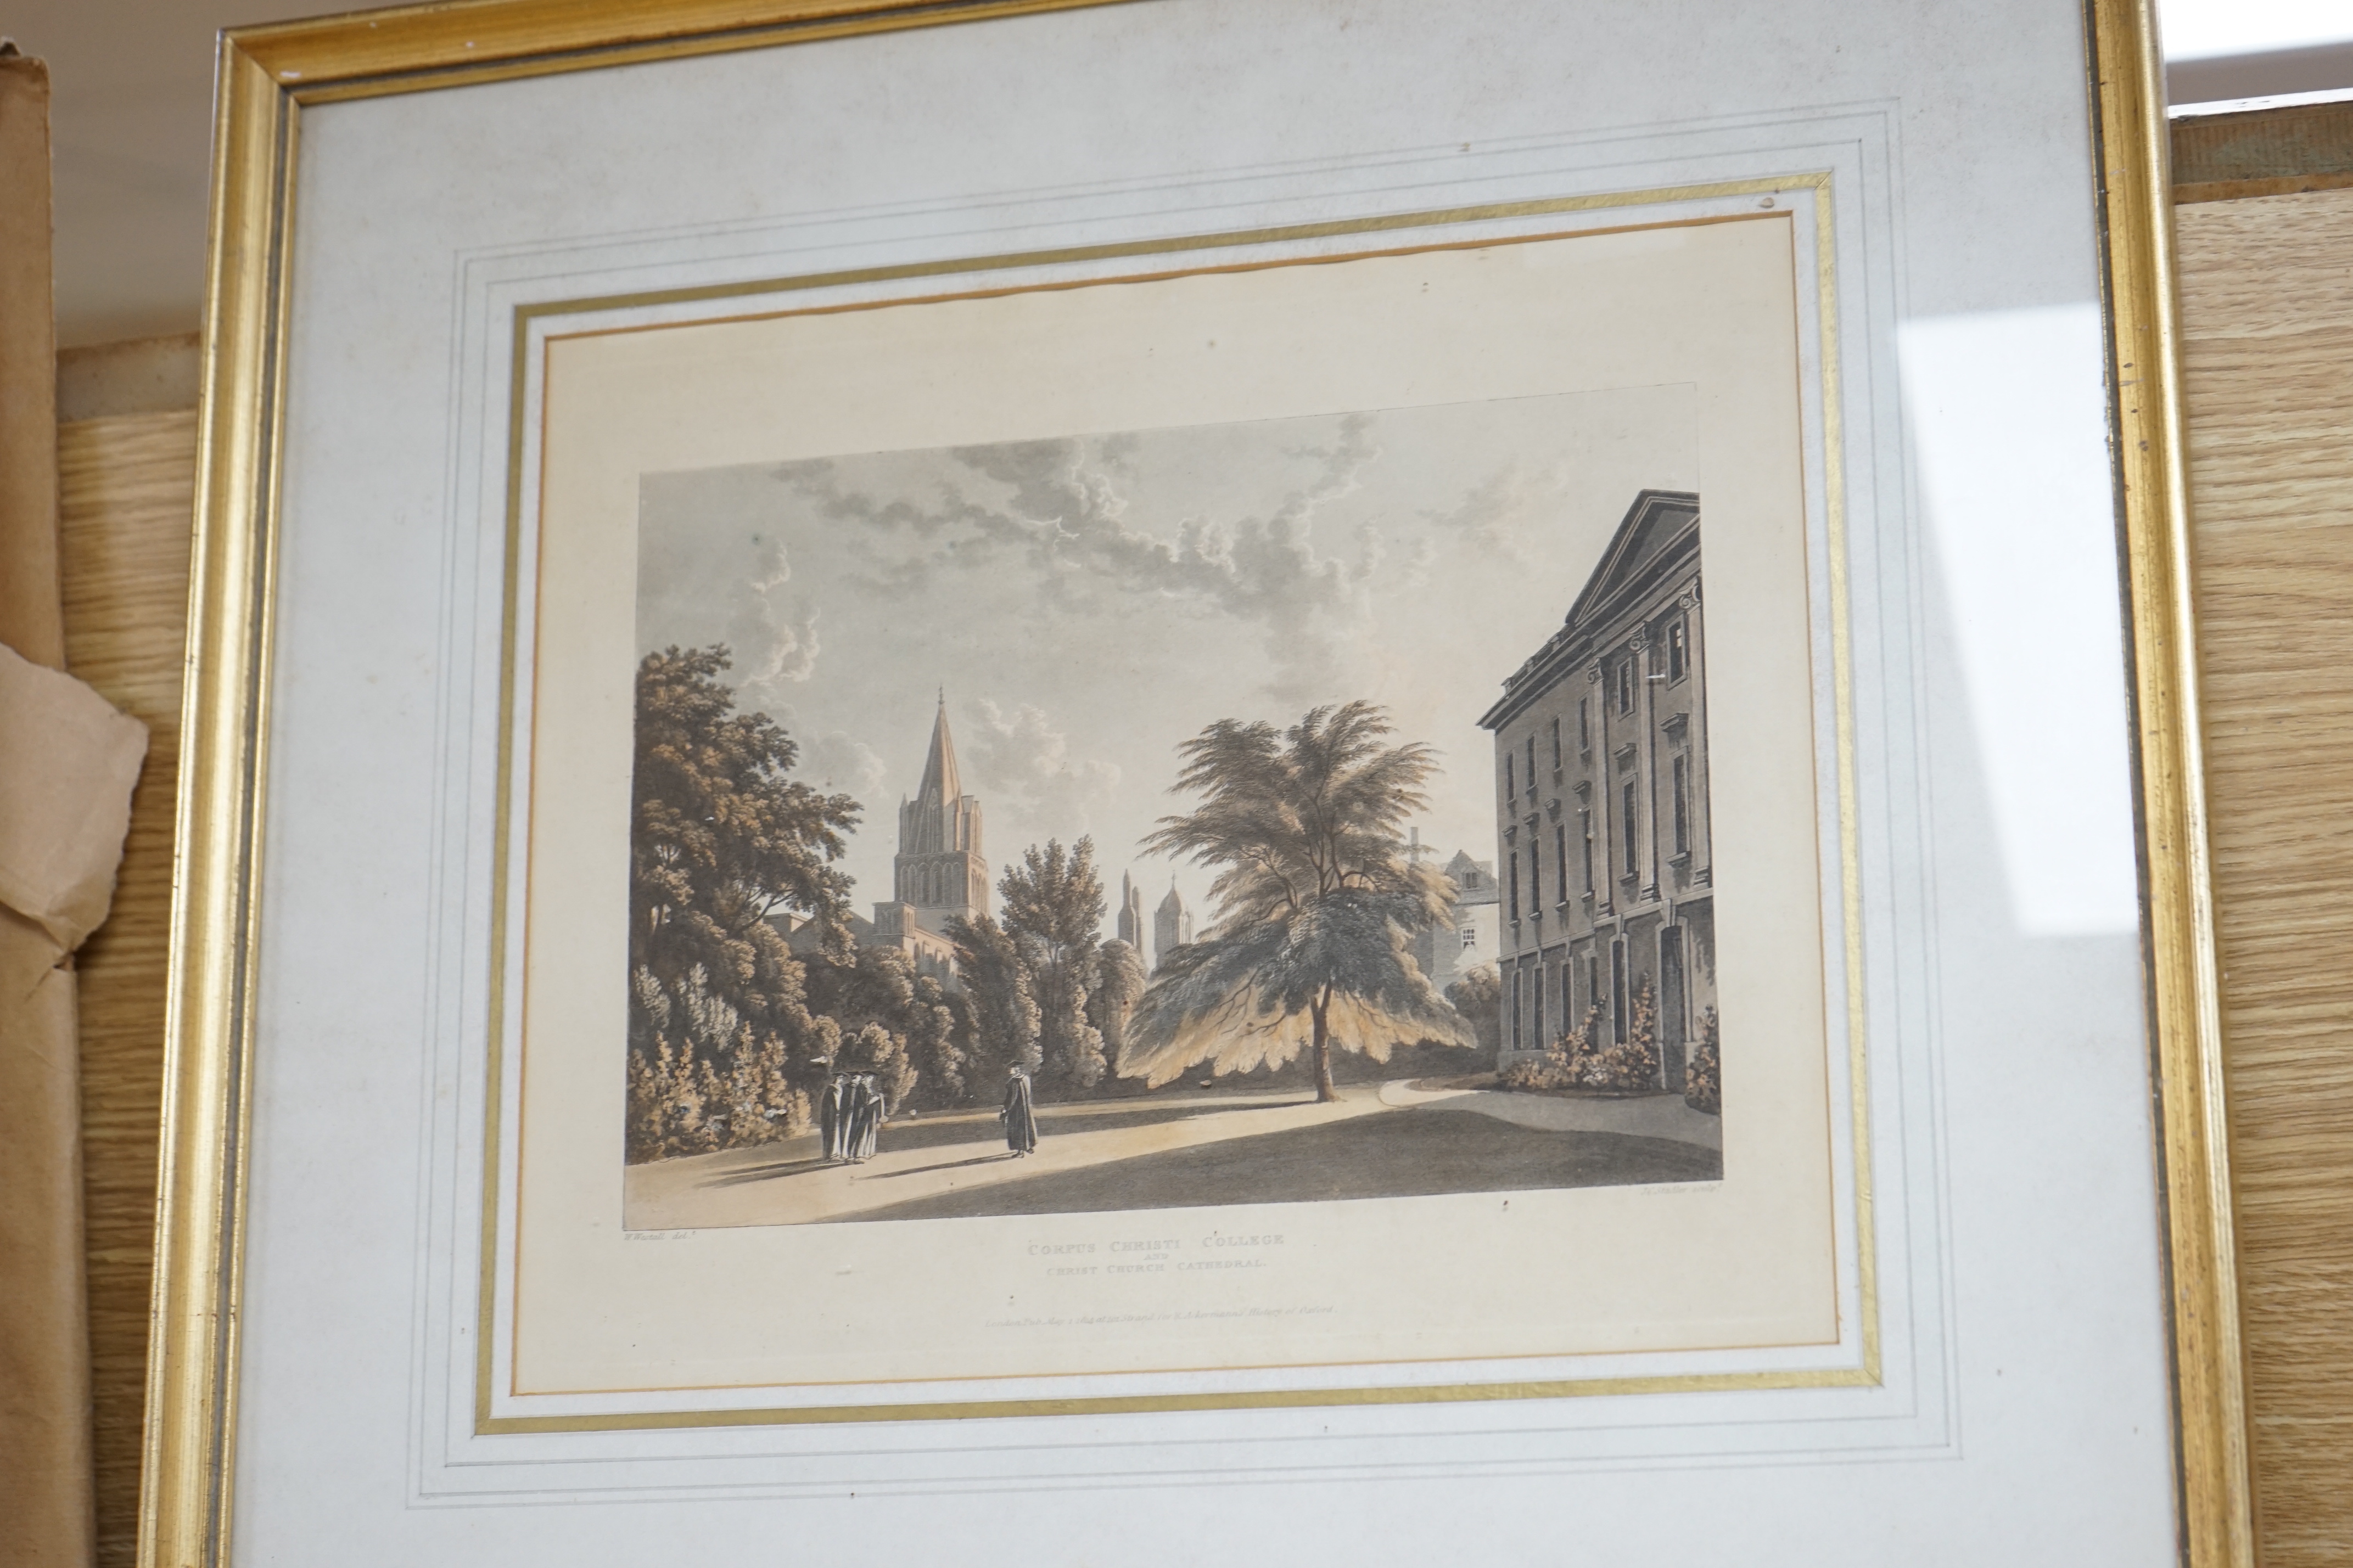 Two 19th century colour engravings, Corpus Christi College and Christchurch Cathedral, one published May 1st, 1841 for R. Ackermann's History of Oxford, London, one mounted, unframed, largest 26 x 31cm, together with Eto